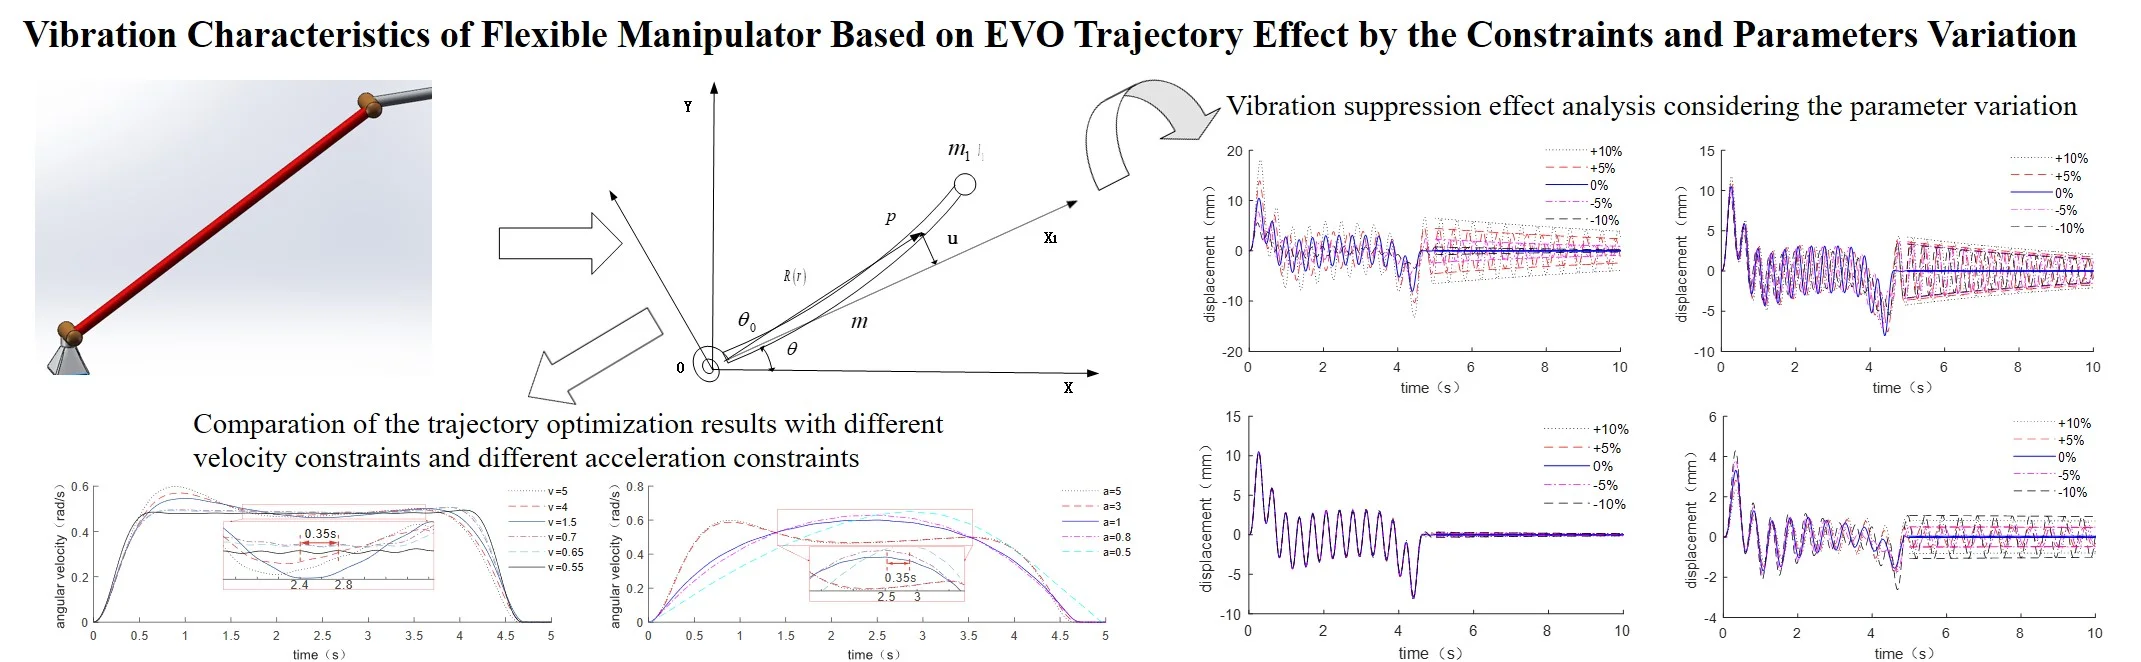 Vibration characteristics of flexible manipulator based on EVO trajectory effect by the constraints and parameters variation